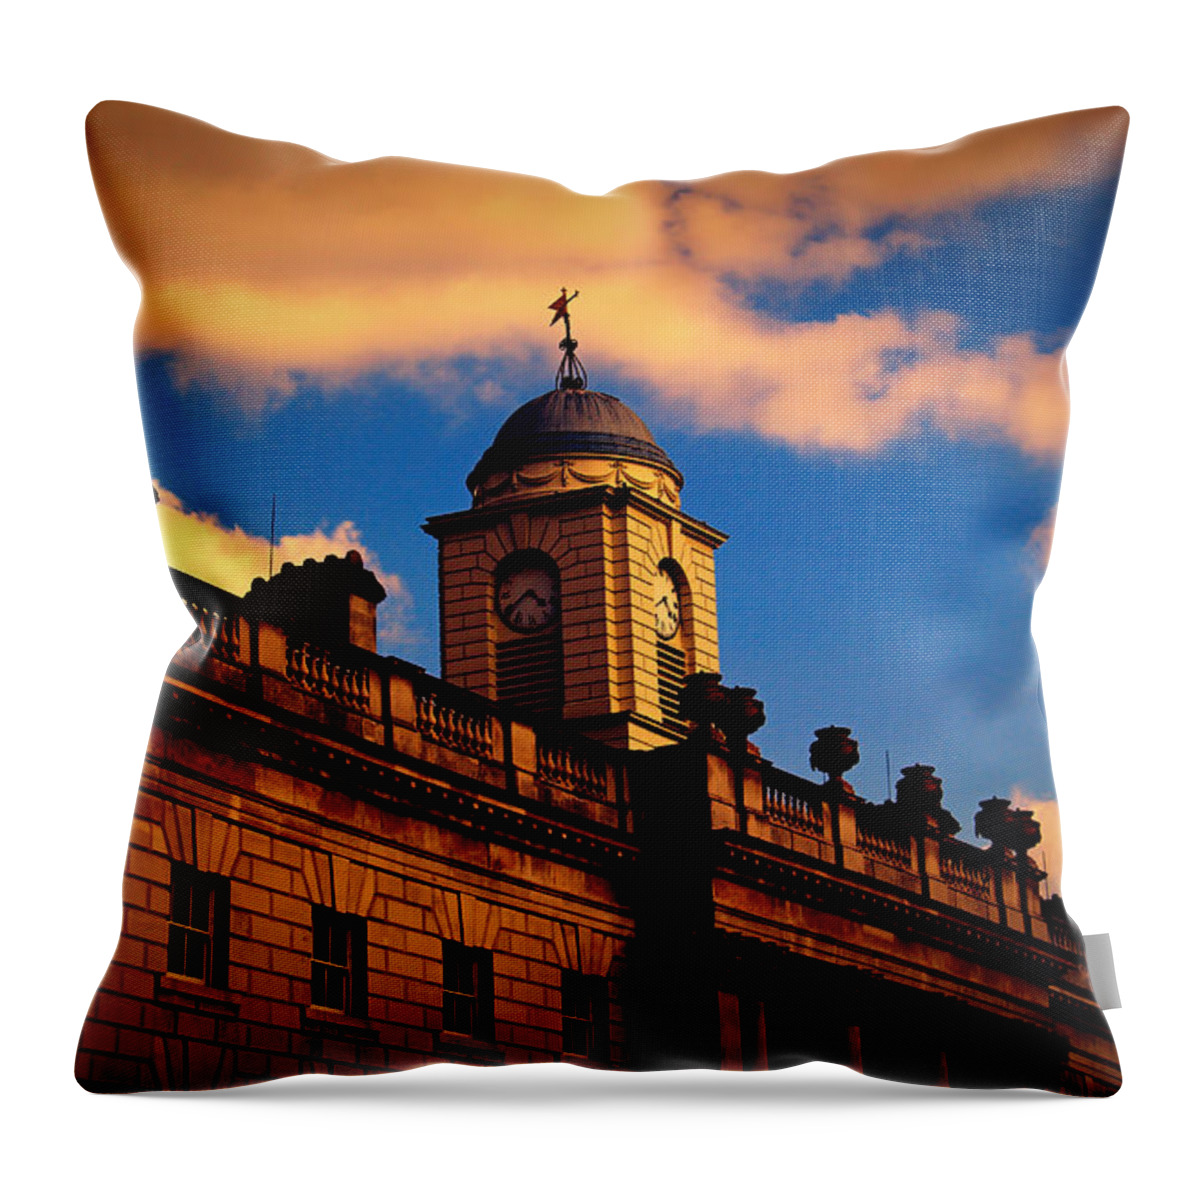 Somerset House Throw Pillow featuring the photograph Somerset House by Nicky Jameson